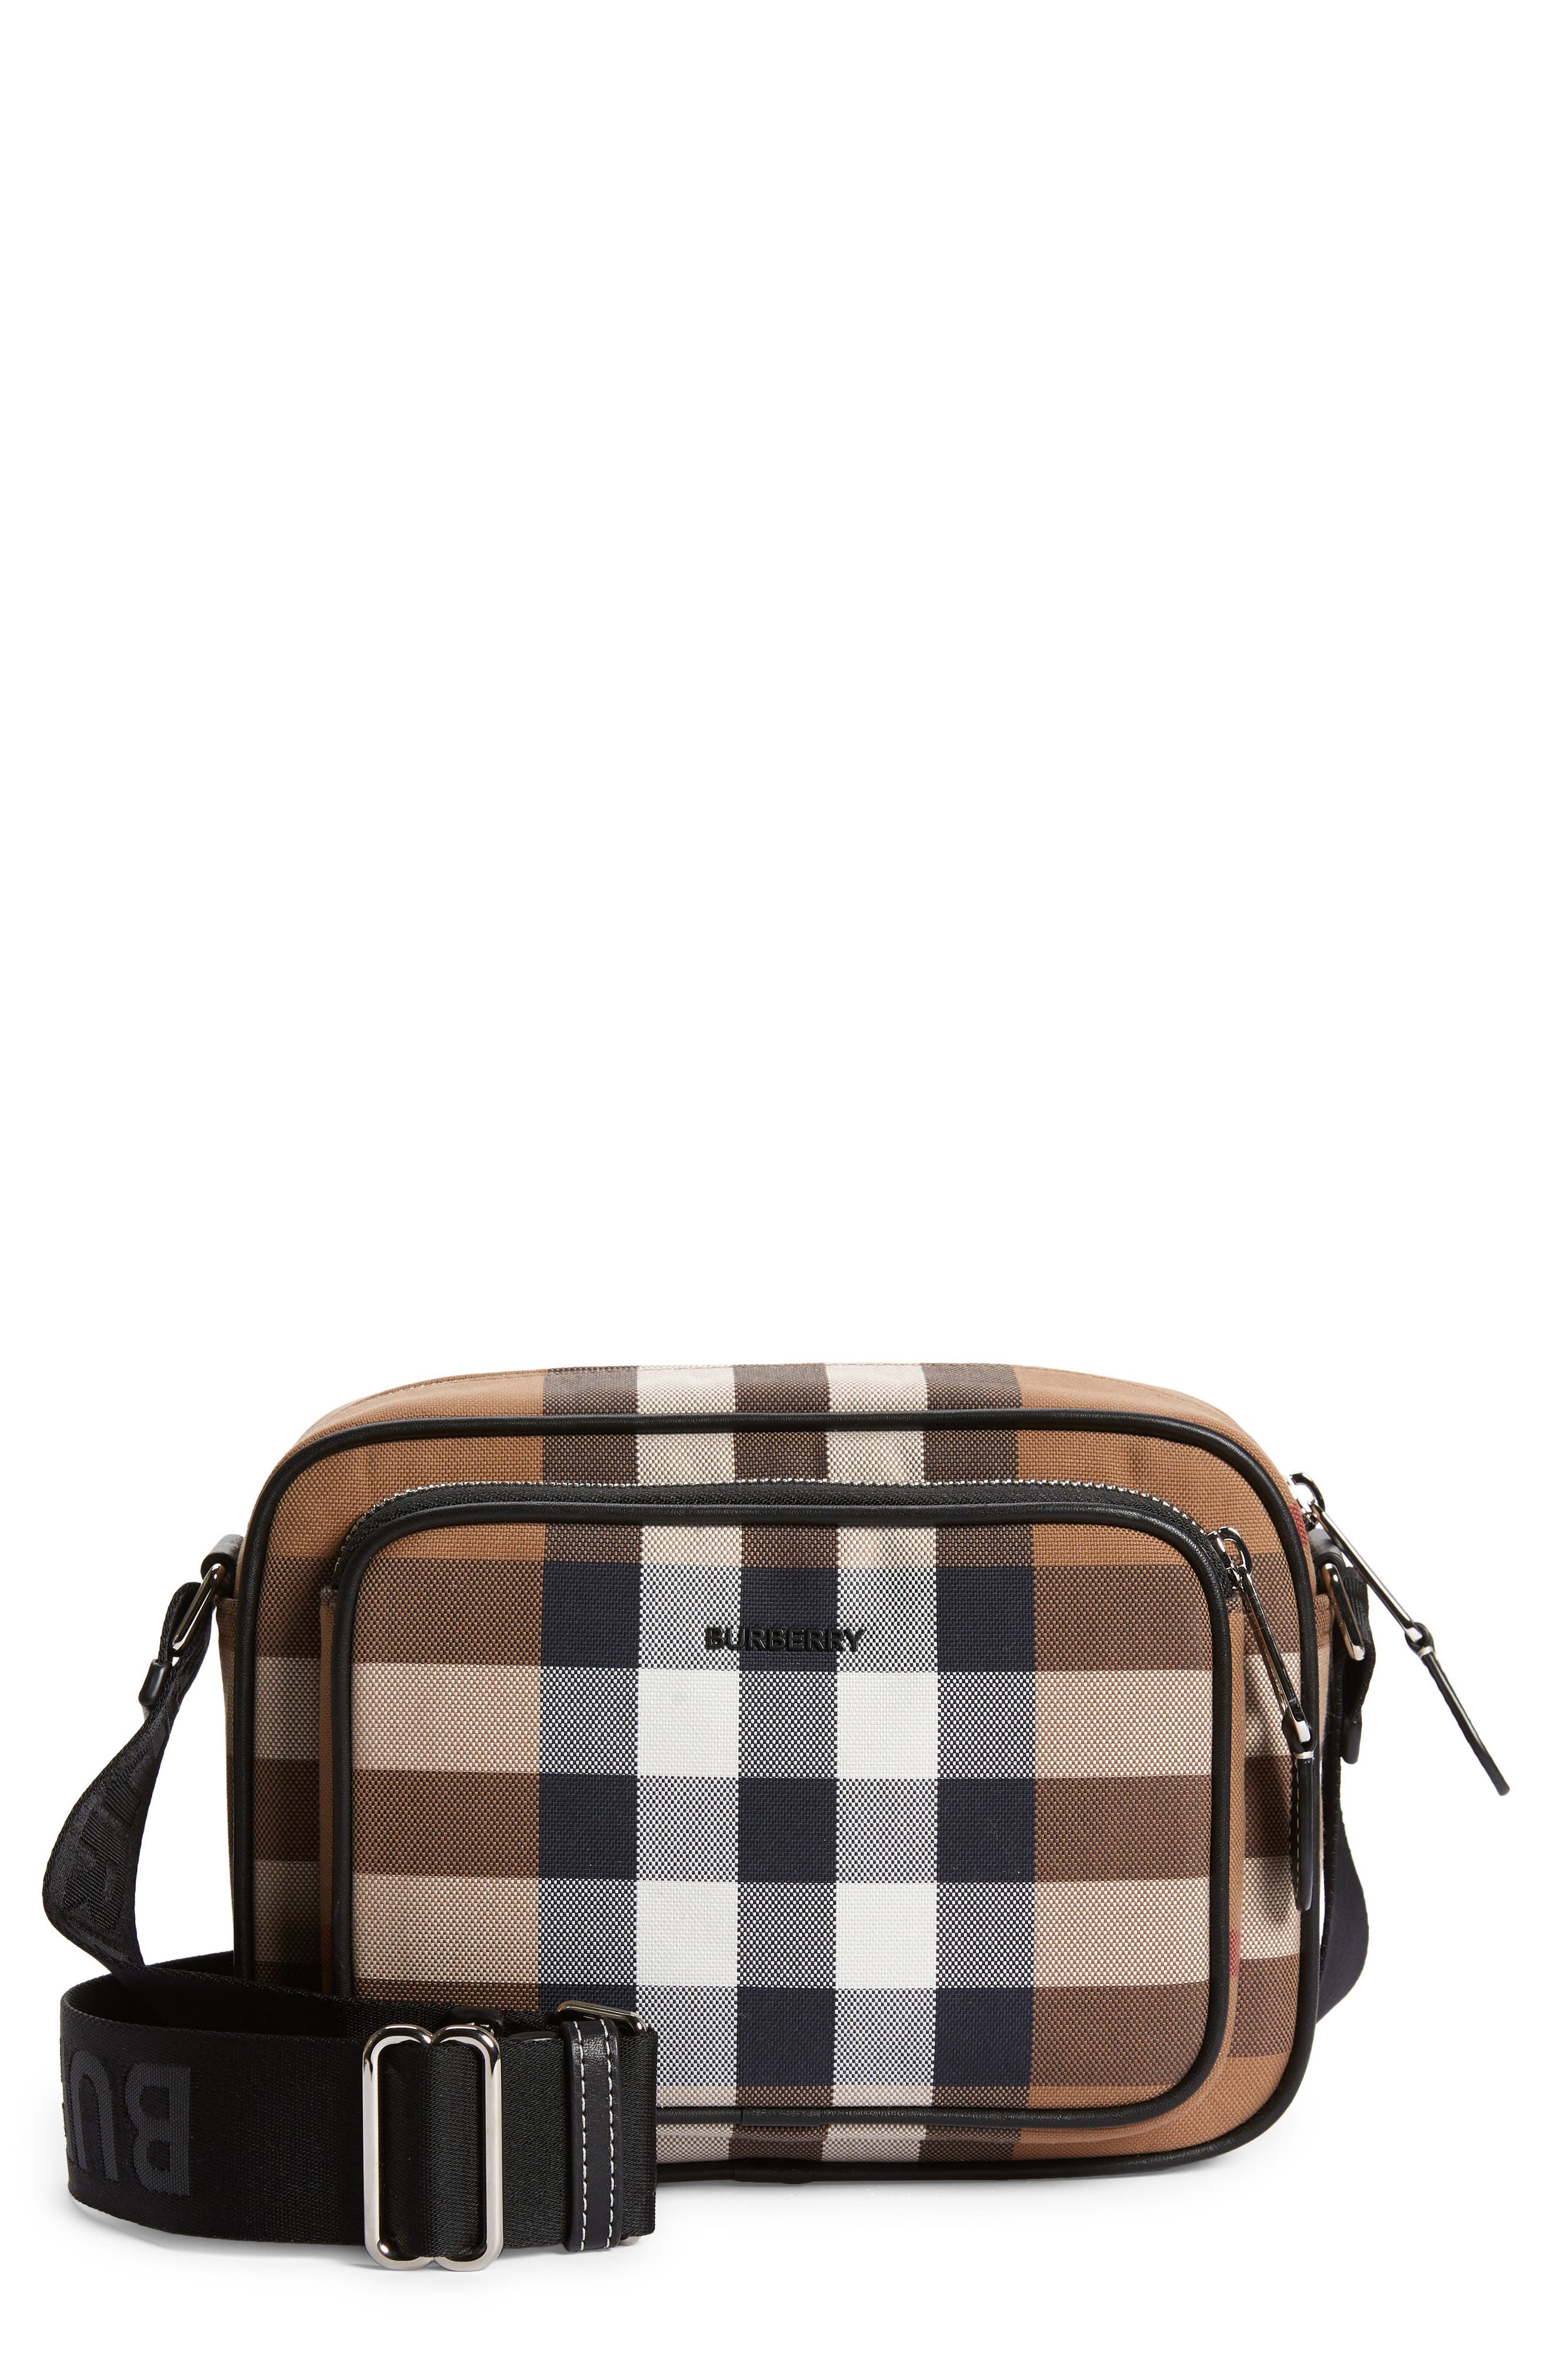 Burberry Paddy Check Canvas Crossbody Bag, $970 | Nordstrom | Lookastic